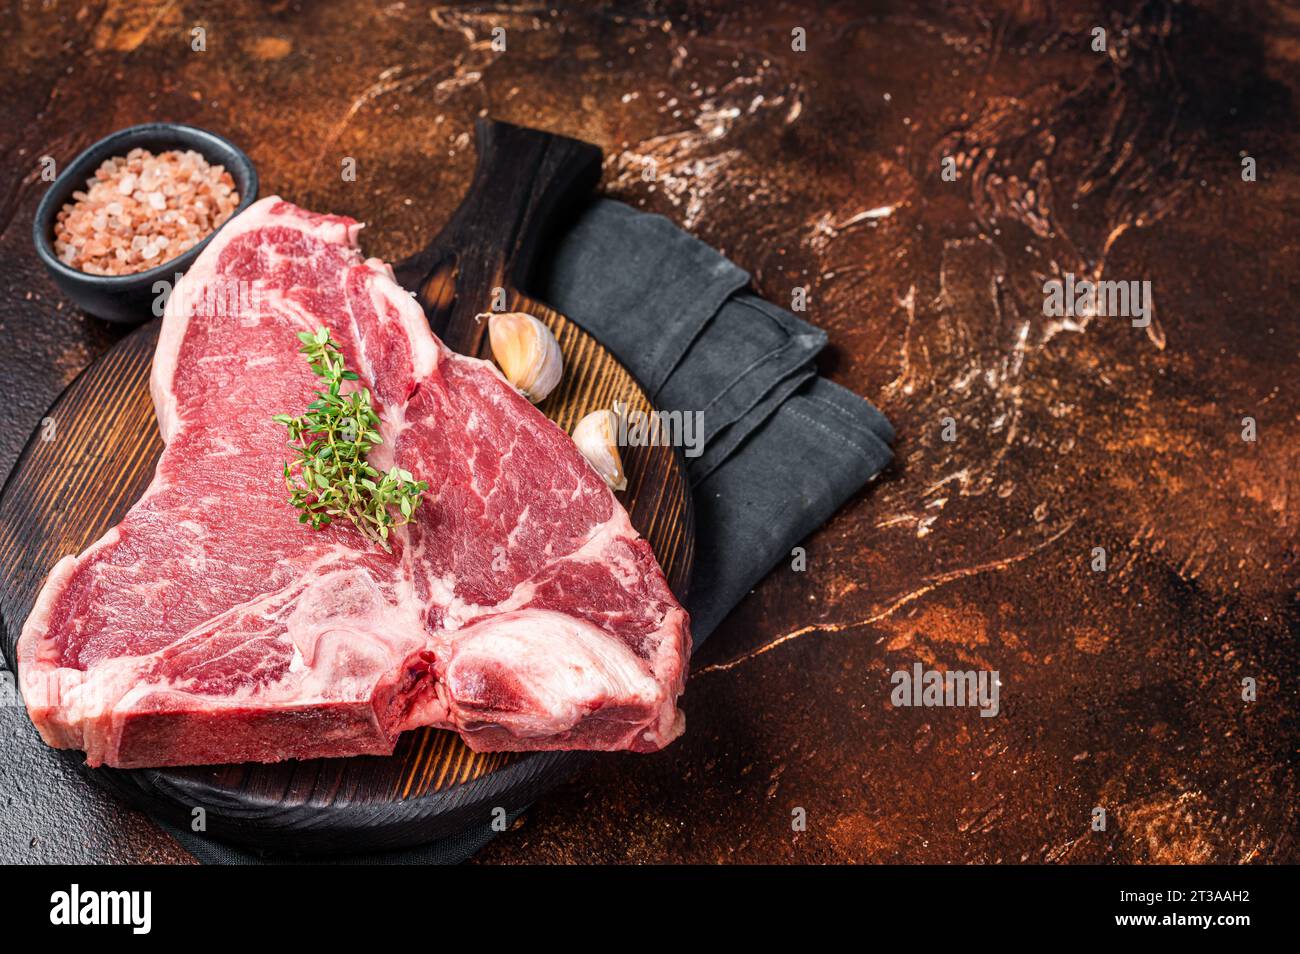 Raw Porterhouse steak, marbled beef meat on a wooden board. Dark background. Top view. Copy space. Stock Photo